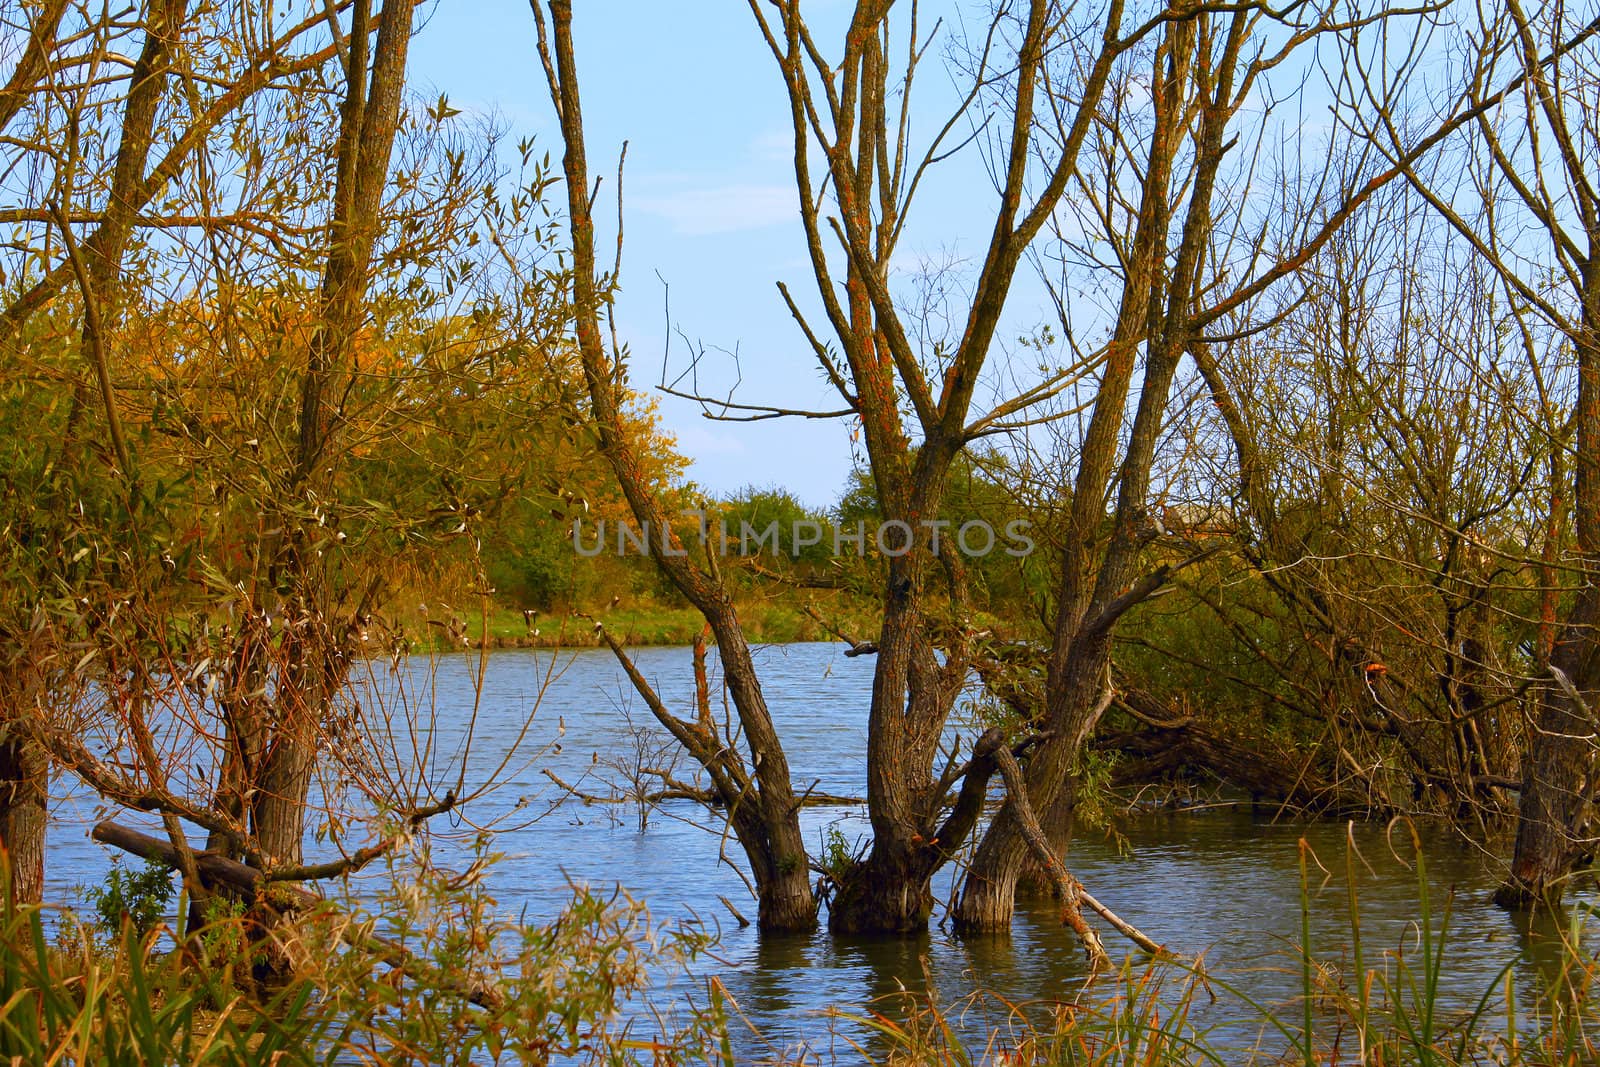 Dry willow trees in a pond in autumn season